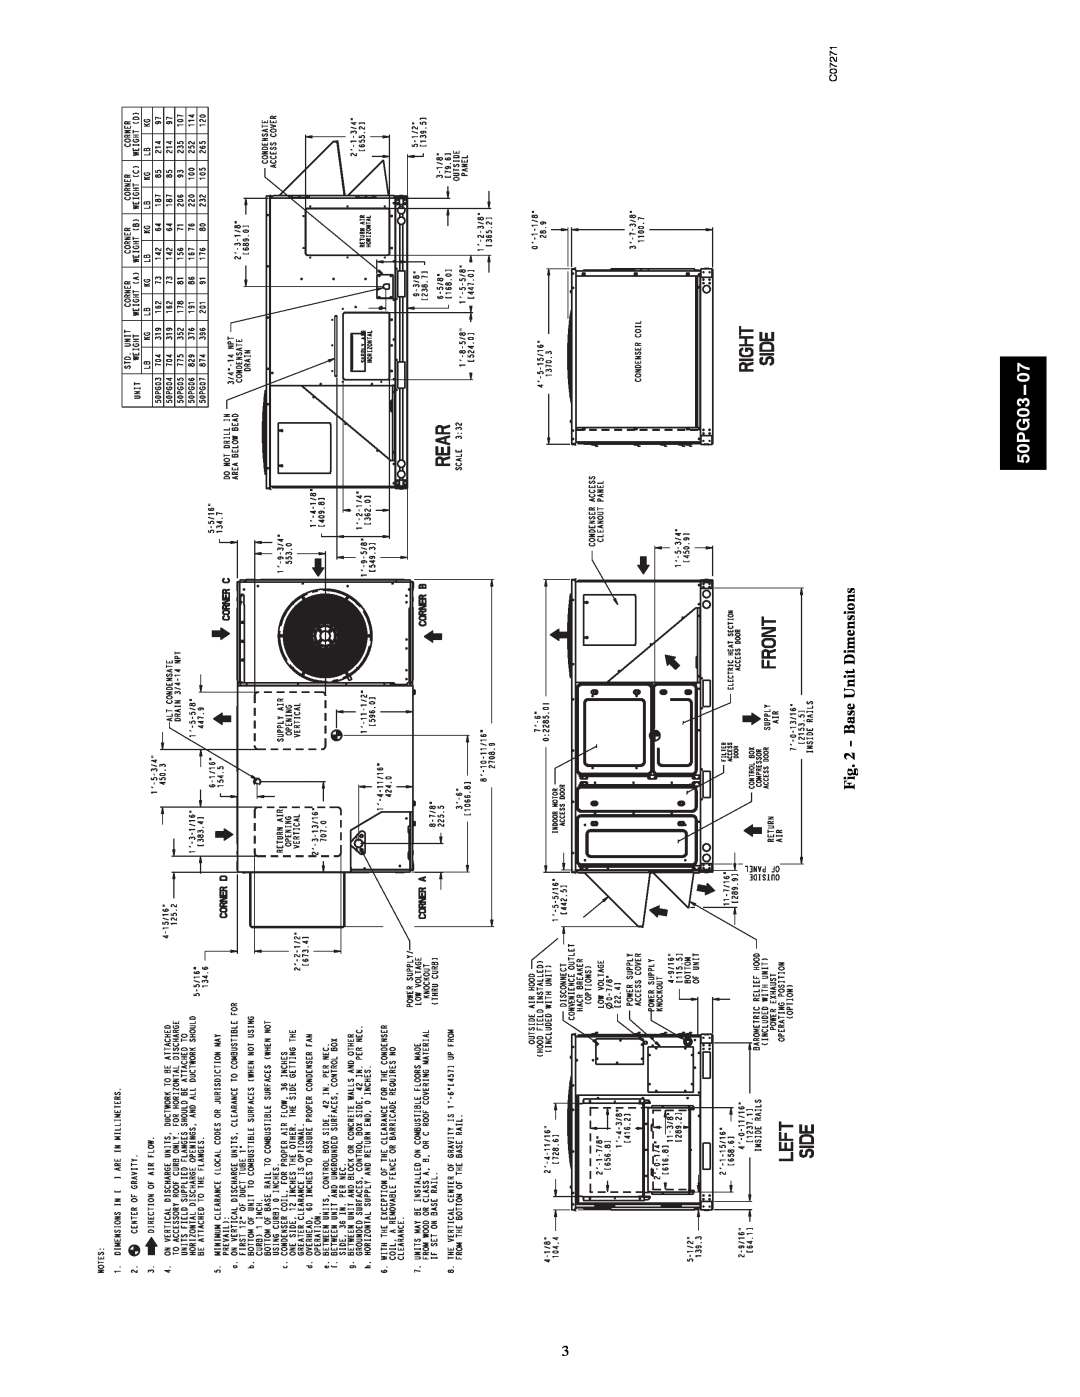 Carrier 50PG03-07 installation instructions Base Unit Dimensions, 50PG03--07, C07271 